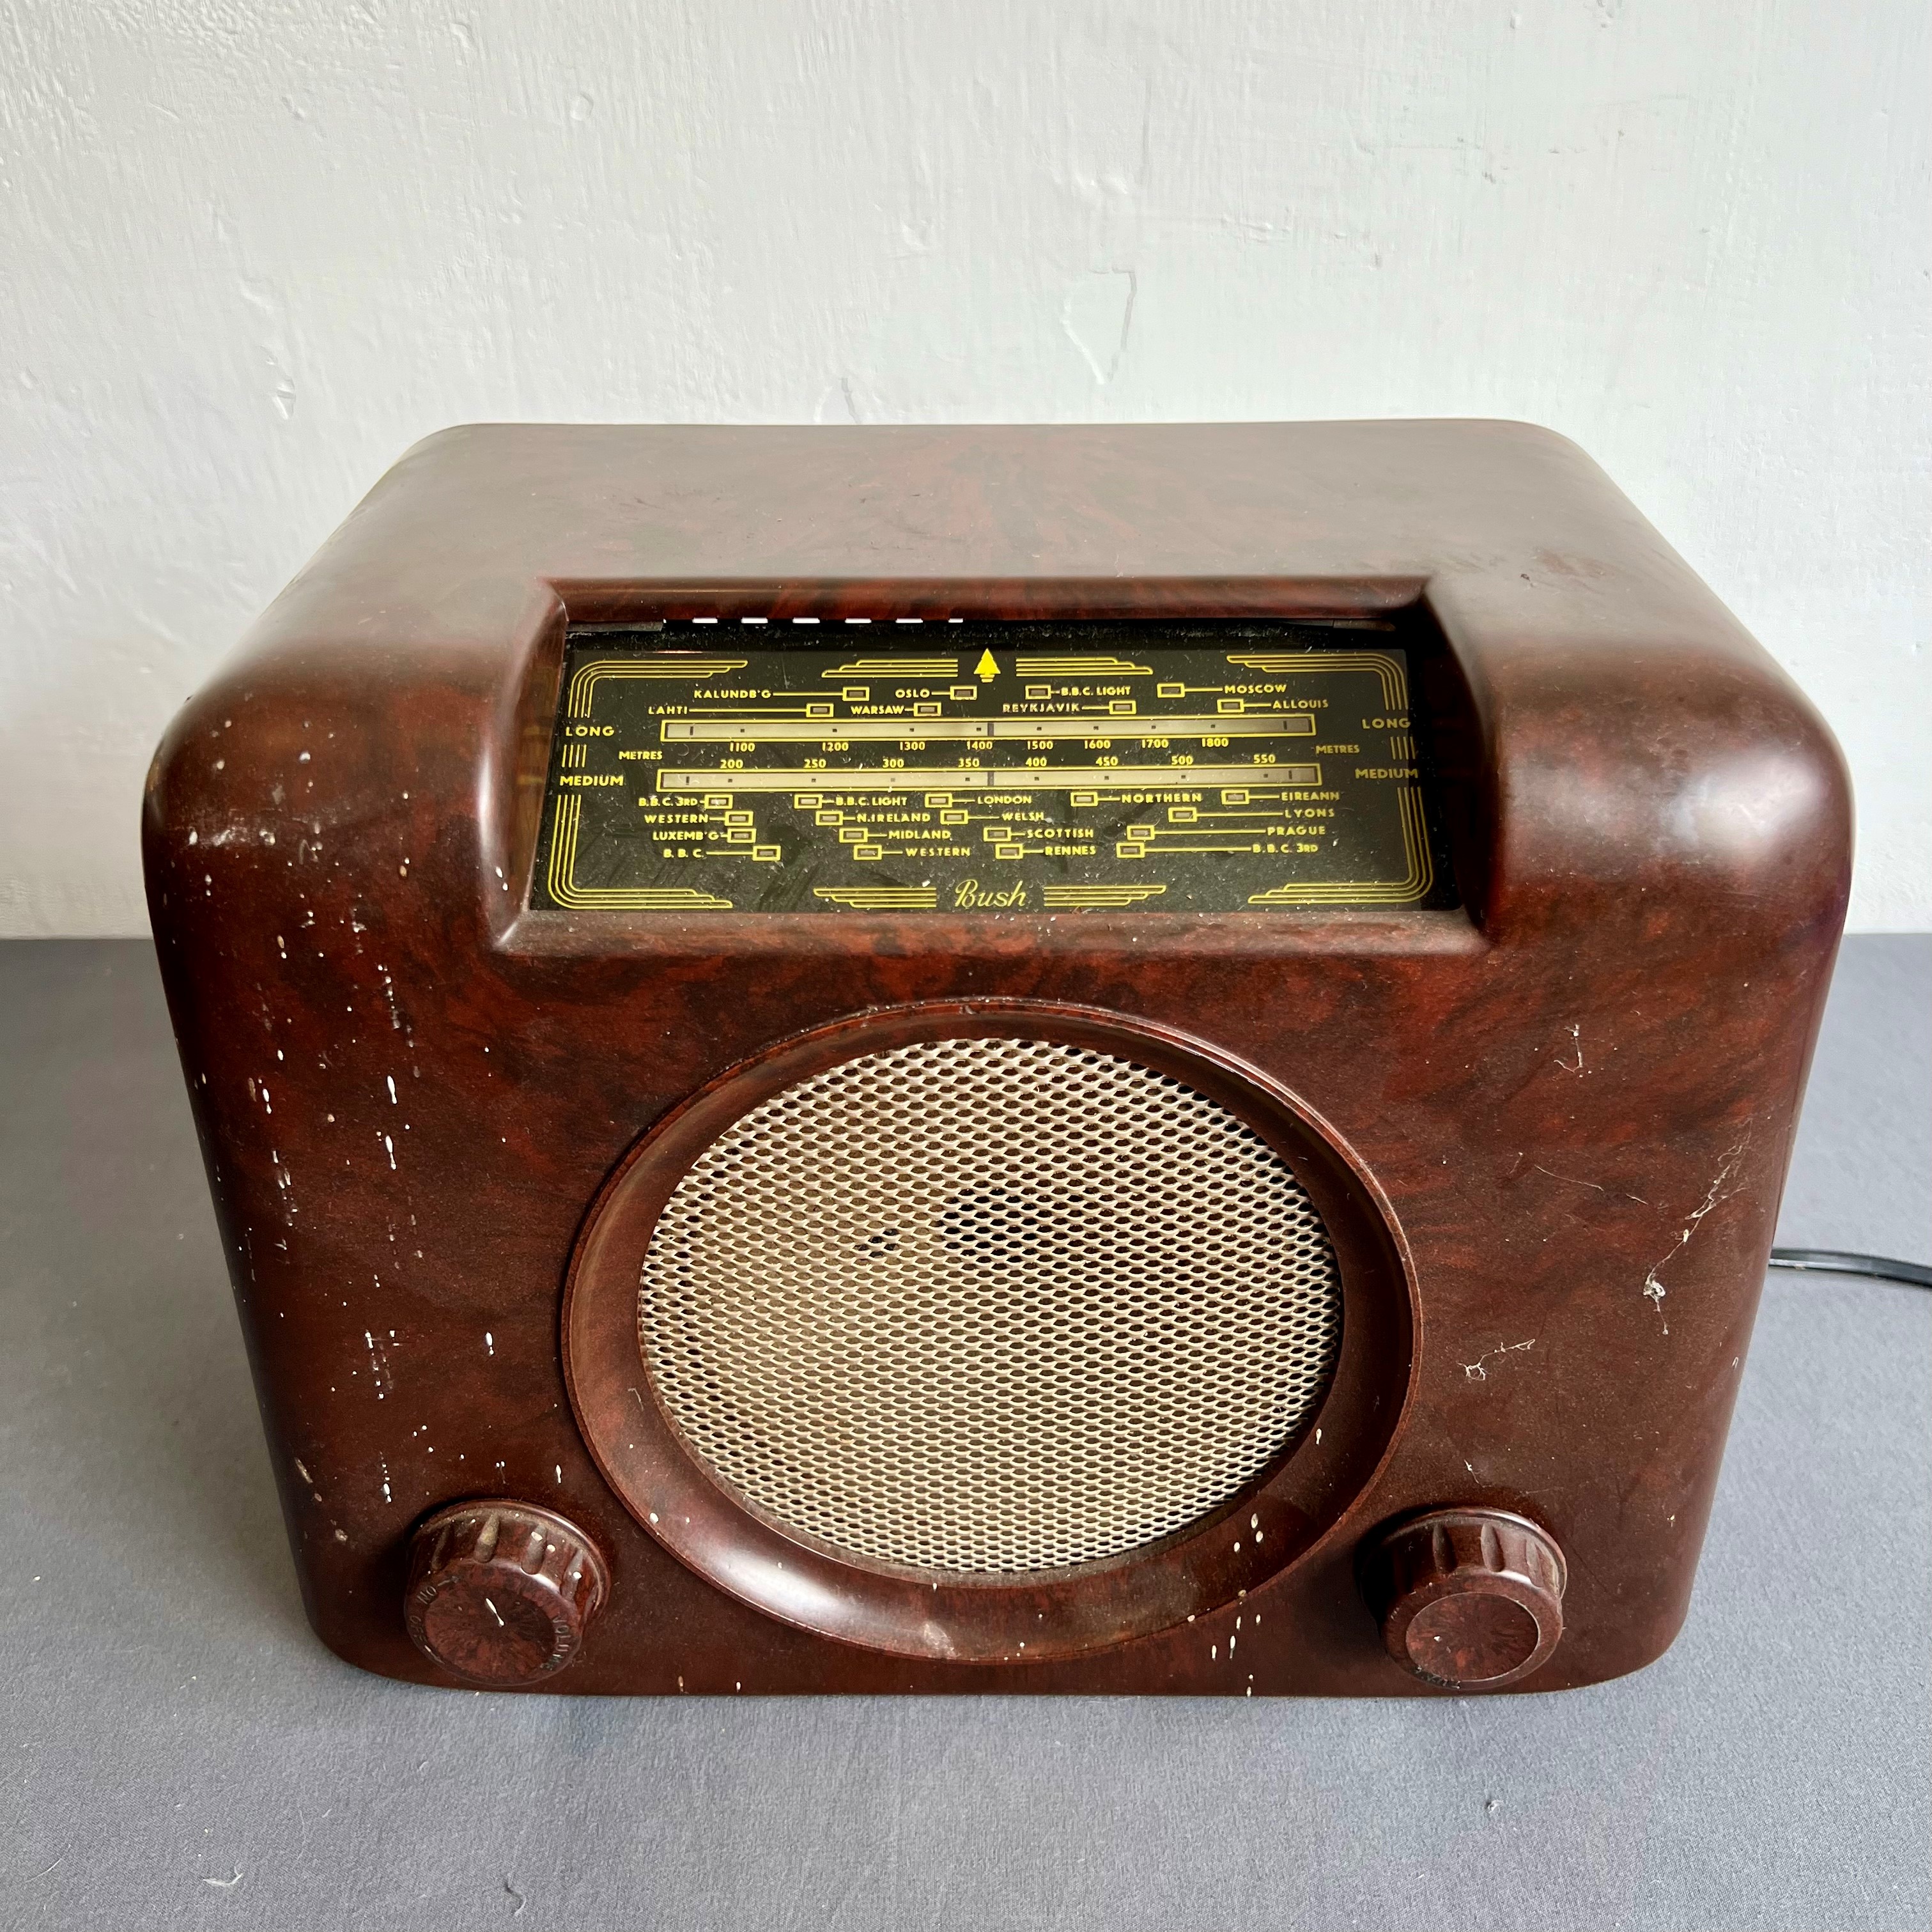 Two Bush bakelite radios - 1950s, comprising a DAC 90A and a DAC 10, both with brown bakelite cases, - Bild 6 aus 8